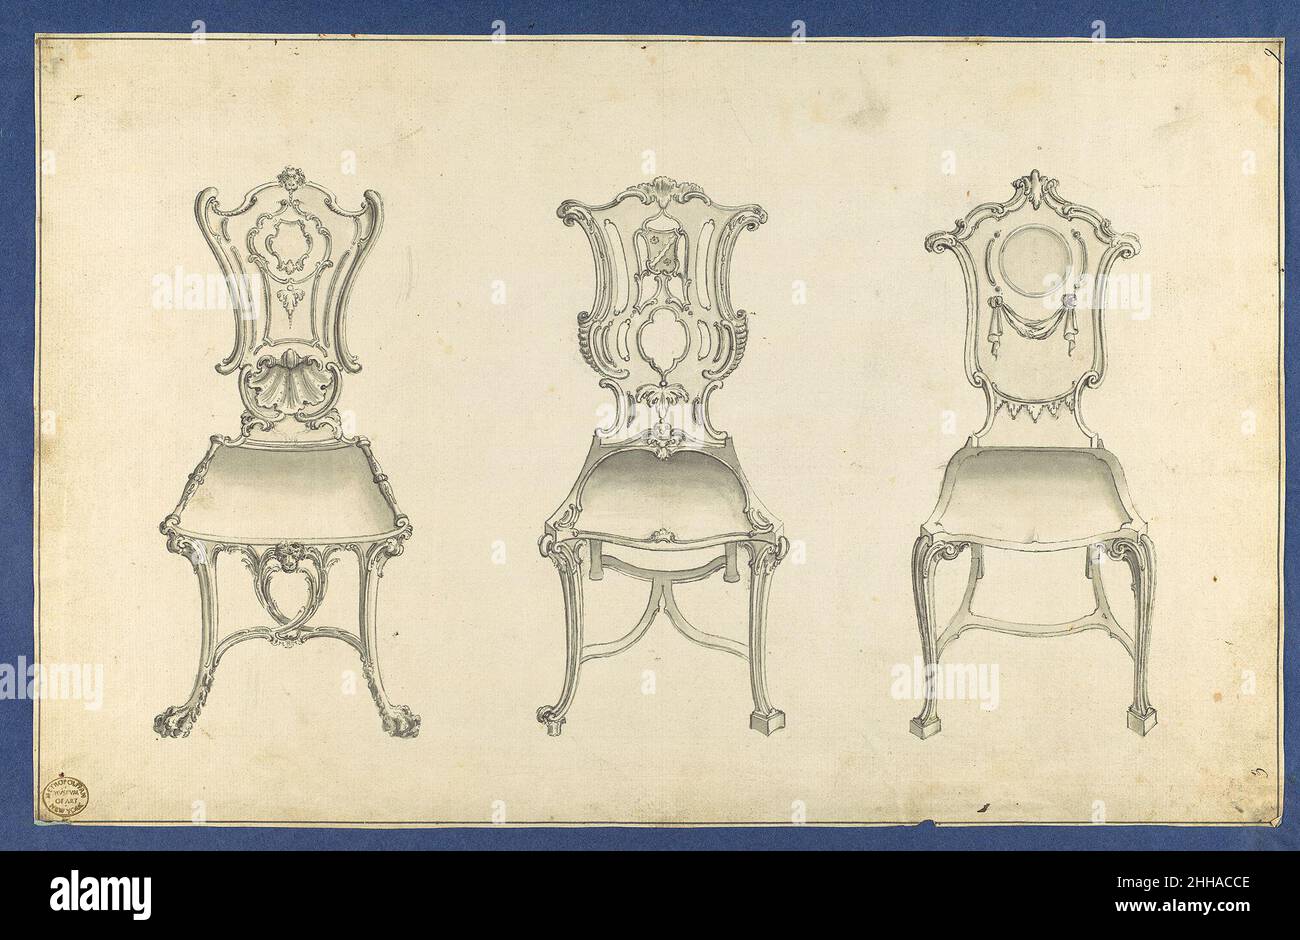 Hall Chairs, in Chippendale Drawings, Vol. I 1762 Thomas Chippendale British Preparatory drawing for Thomas Chippendale's 'Gentleman and Cabinet Maker's Director'. Published in reverse as plate XVIII in the third edition of 1762.. Hall Chairs, in Chippendale Drawings, Vol. I  390501 Stock Photo